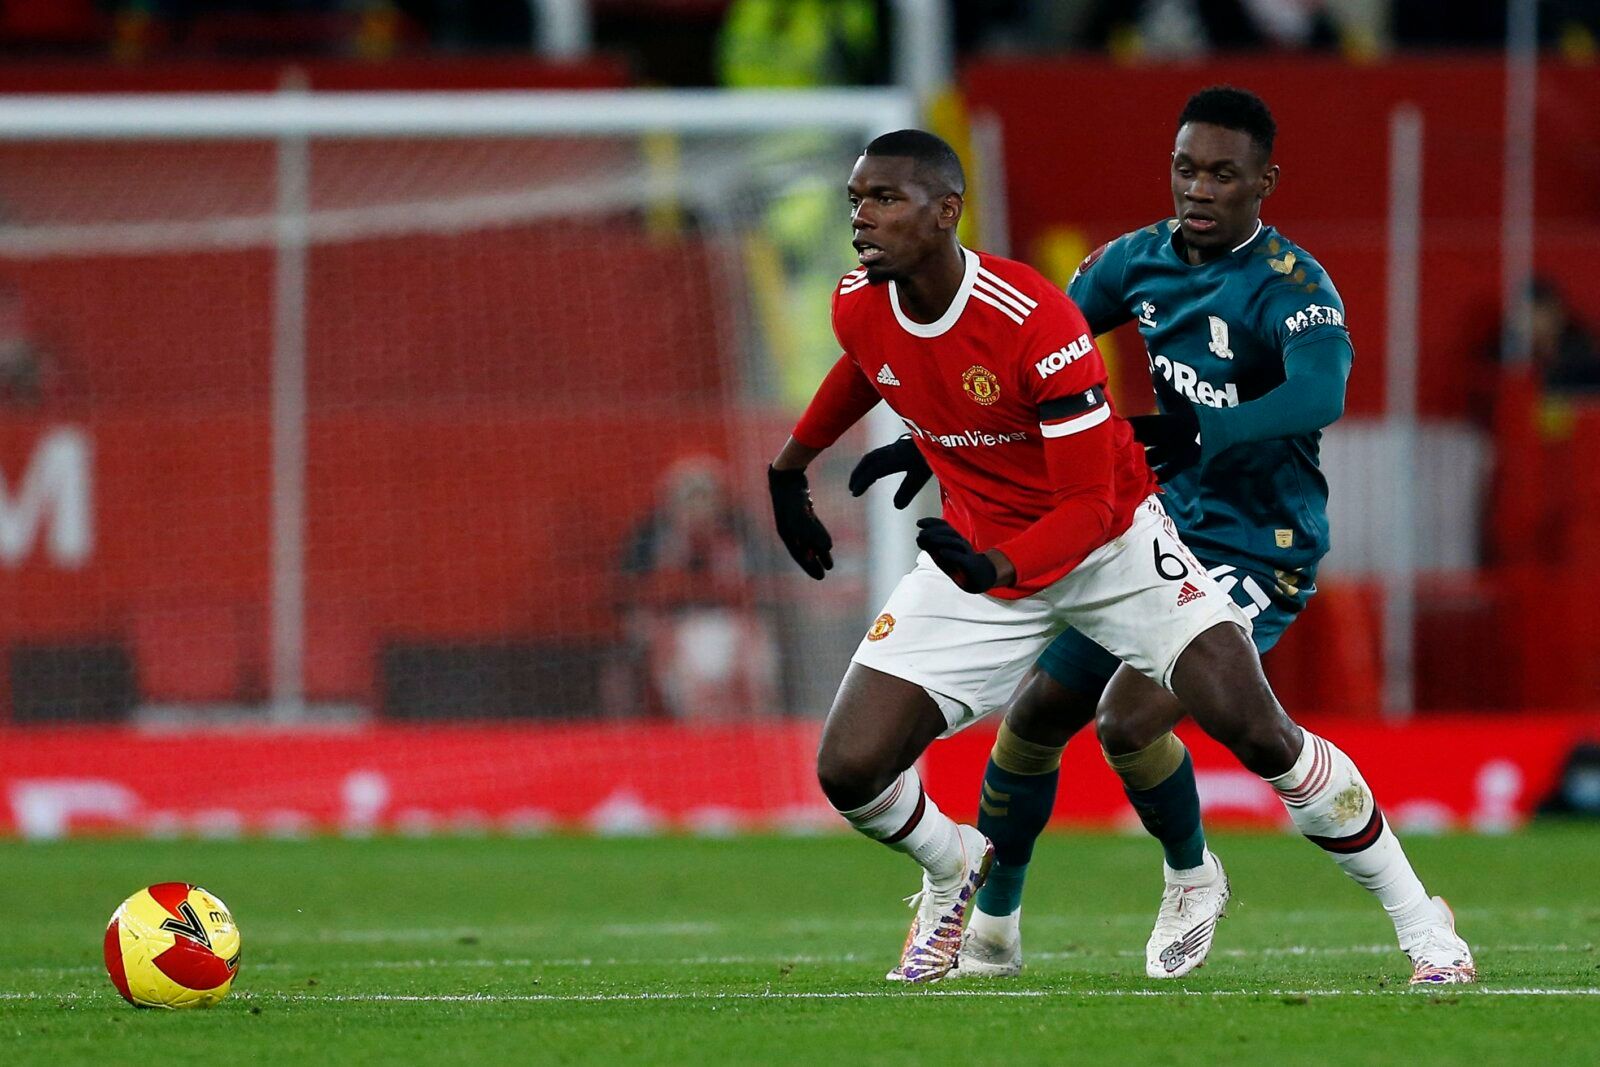 Soccer Football - FA Cup Fourth Round - Manchester United v Middlesbrough - Old Trafford, Manchester, Britain - February 4, 2022 Manchester United's Paul Pogba in action with Middlesbrough's Folarin Balogun REUTERS/Craig Brough